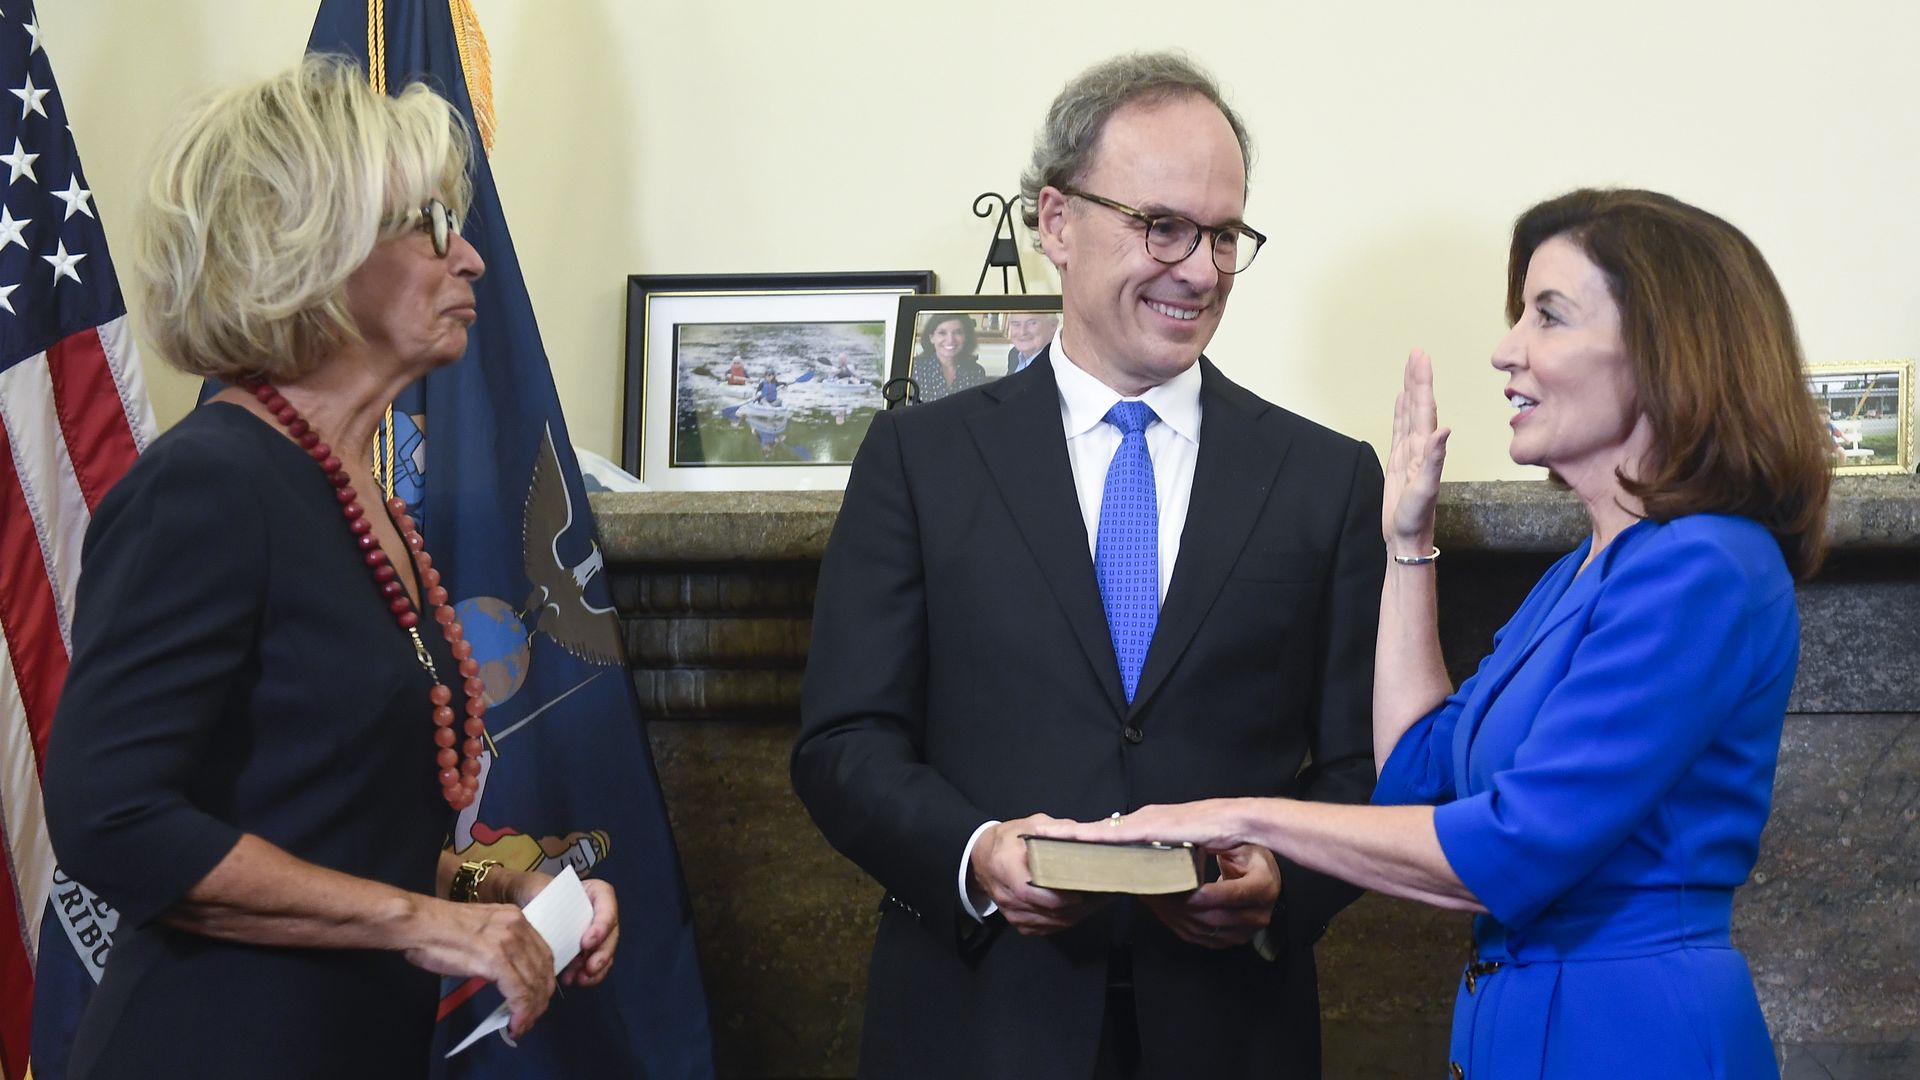 Kathy Hochul (R) is administered the oath of office as New York State governor by Court of Appeals Chief Judge Janet DiFiore 